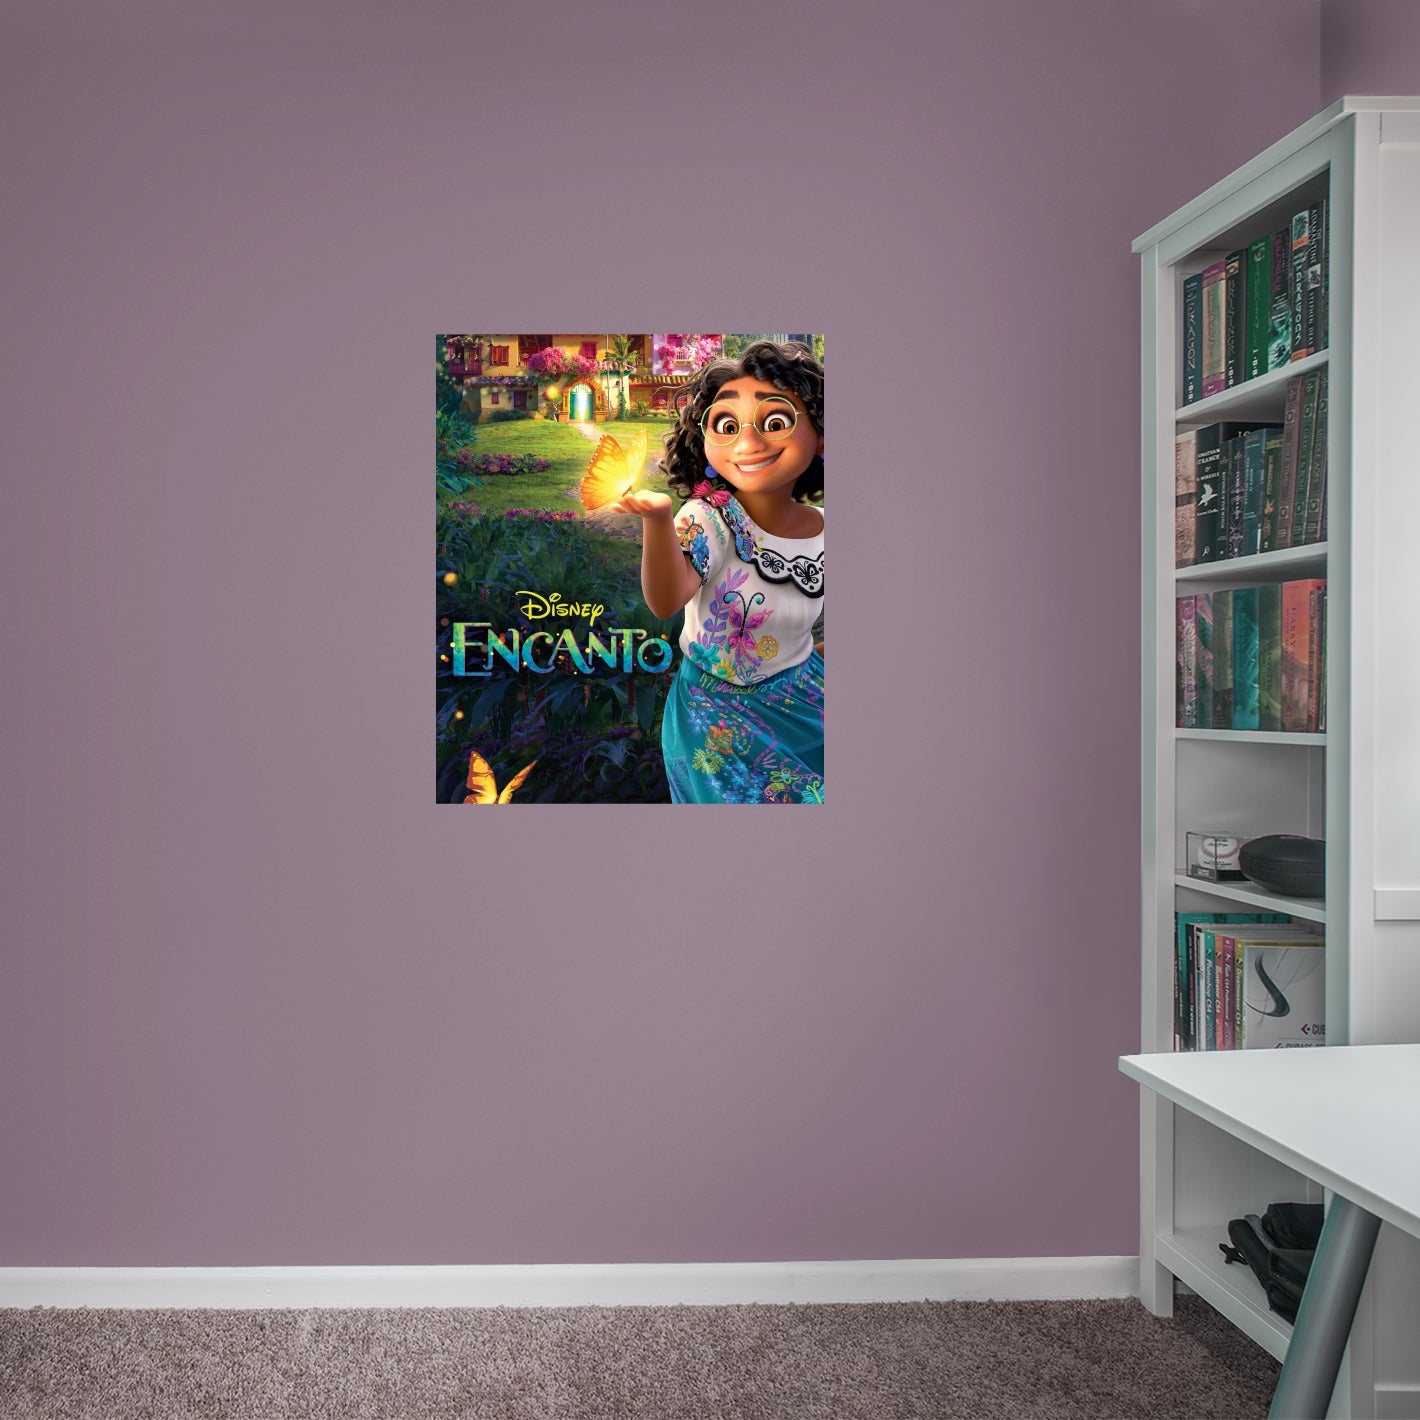 Encanto: Mirabel Movie Poster Poster - Officially Licensed Disney Removable Adhesive Decal